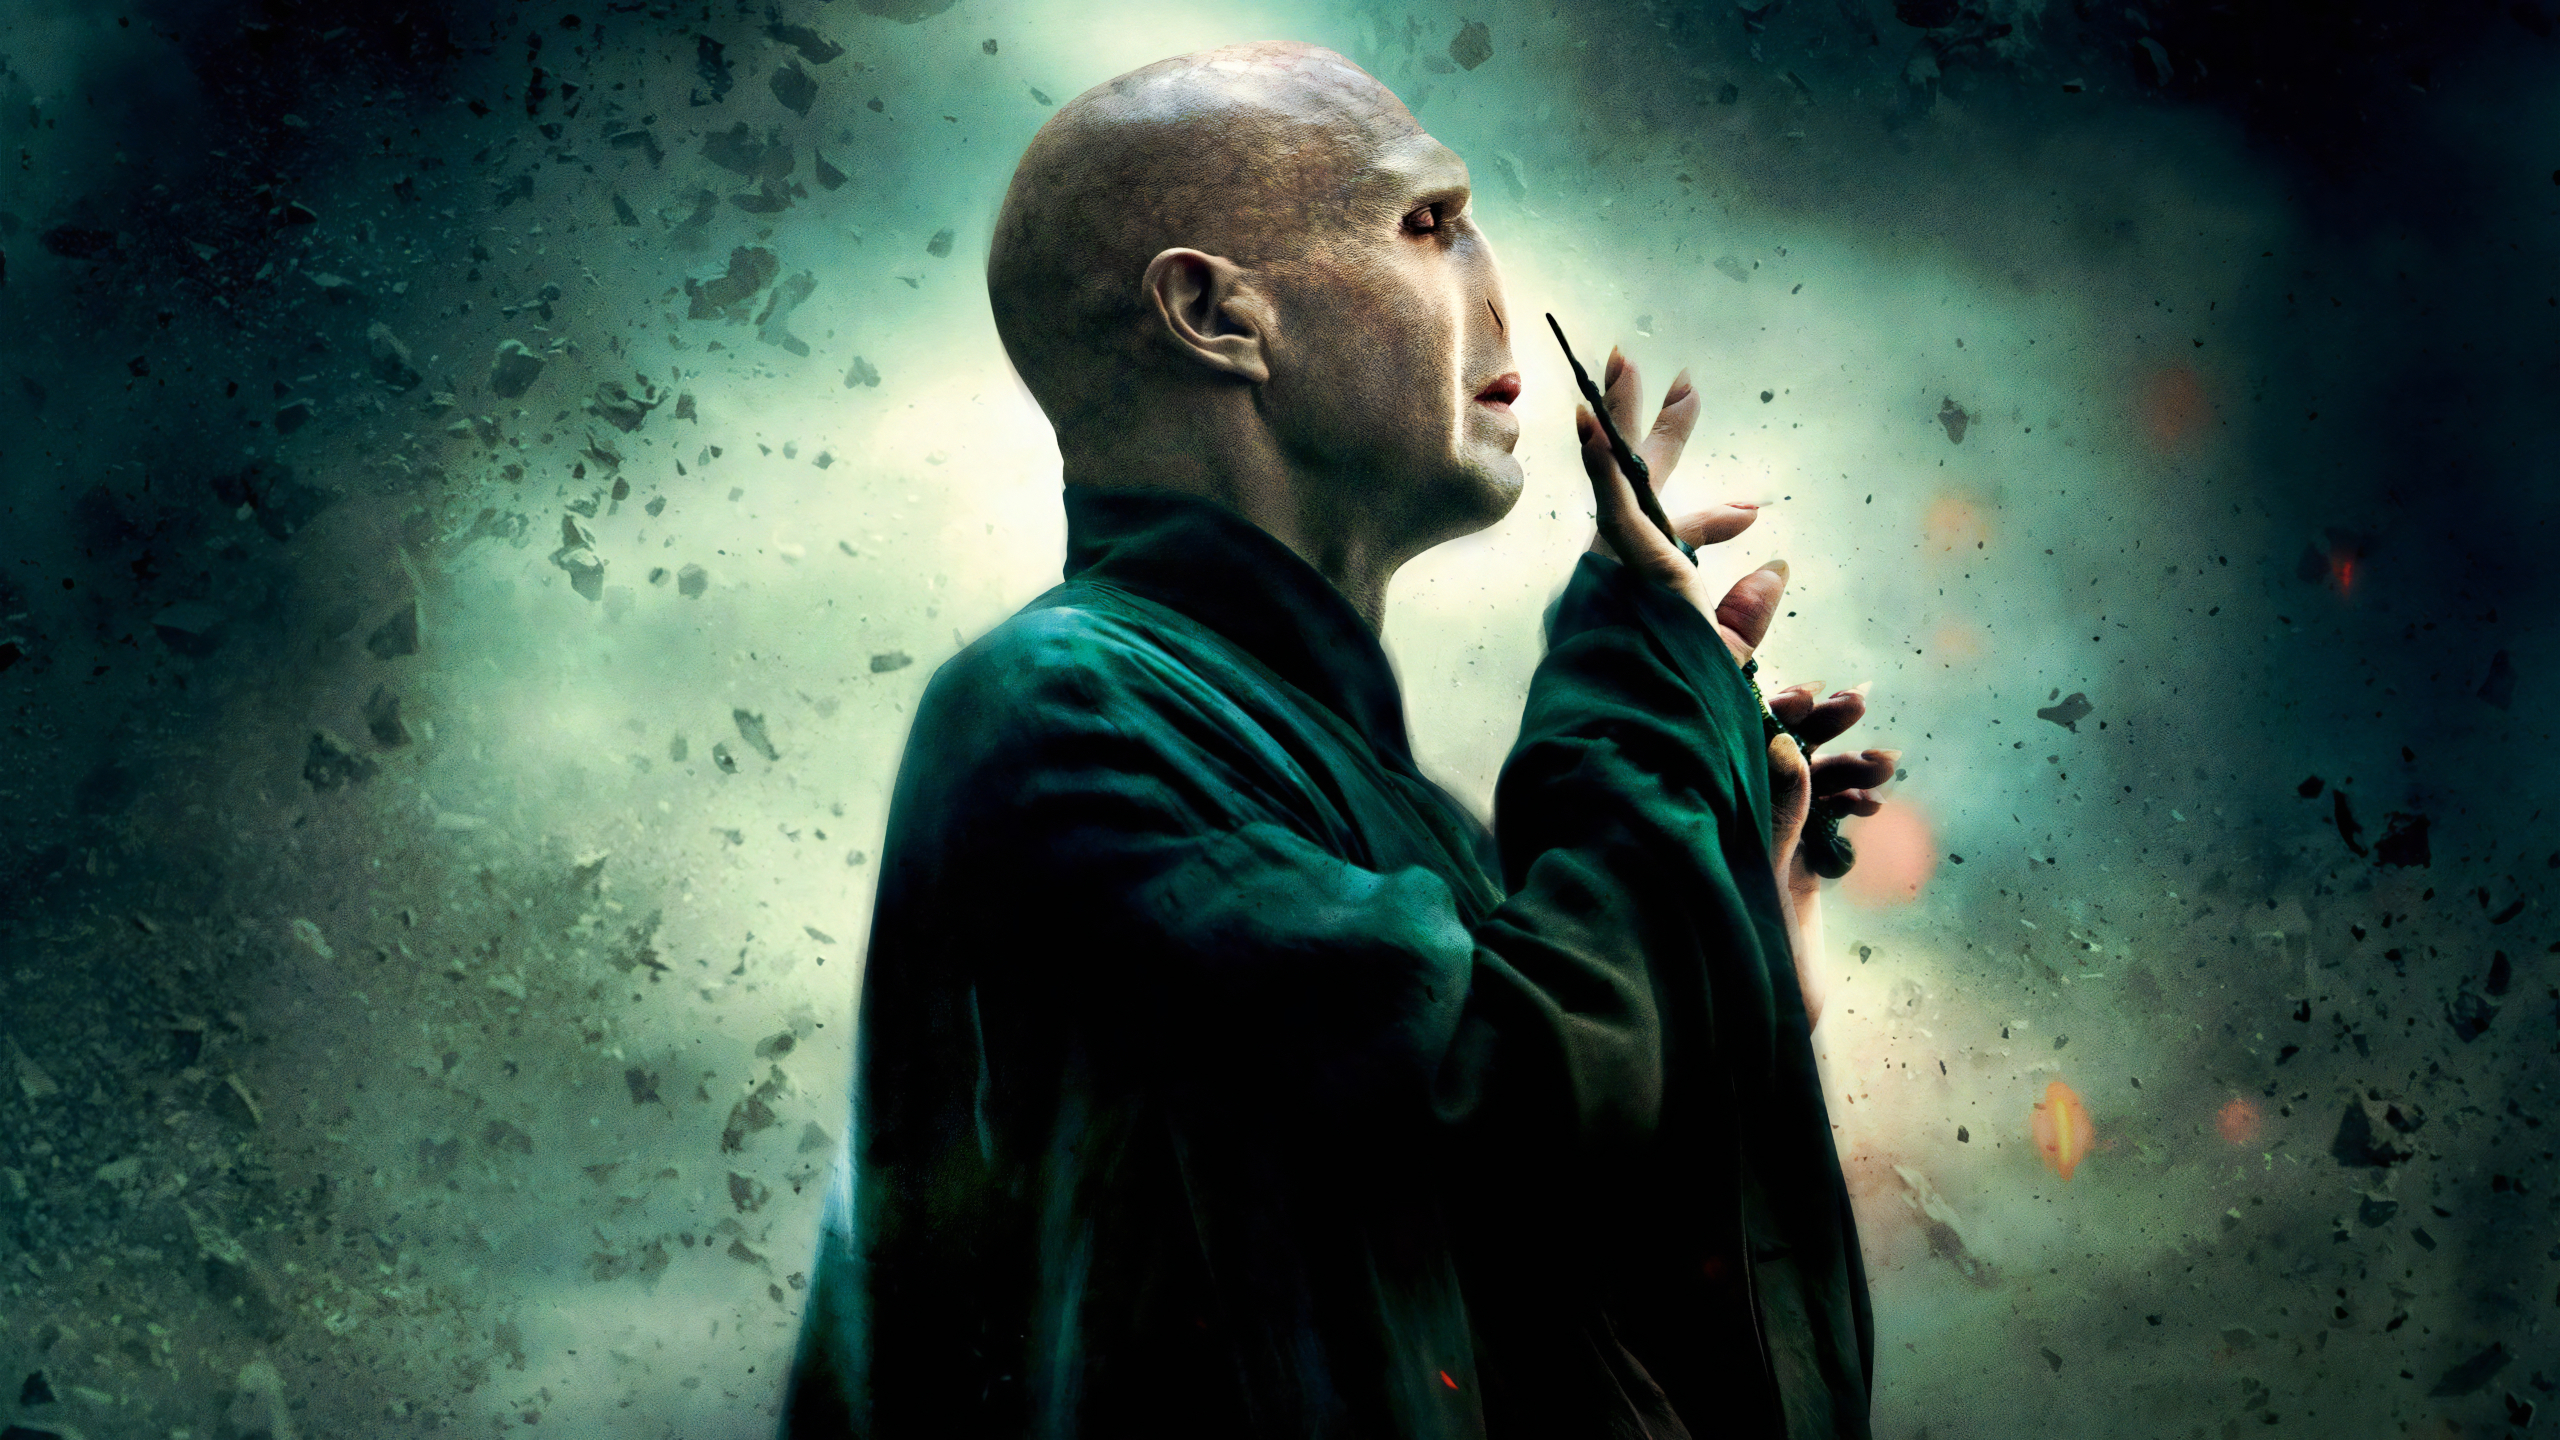 harry potter and the deathly hallows: part 2, harry potter, movie, lord voldemort